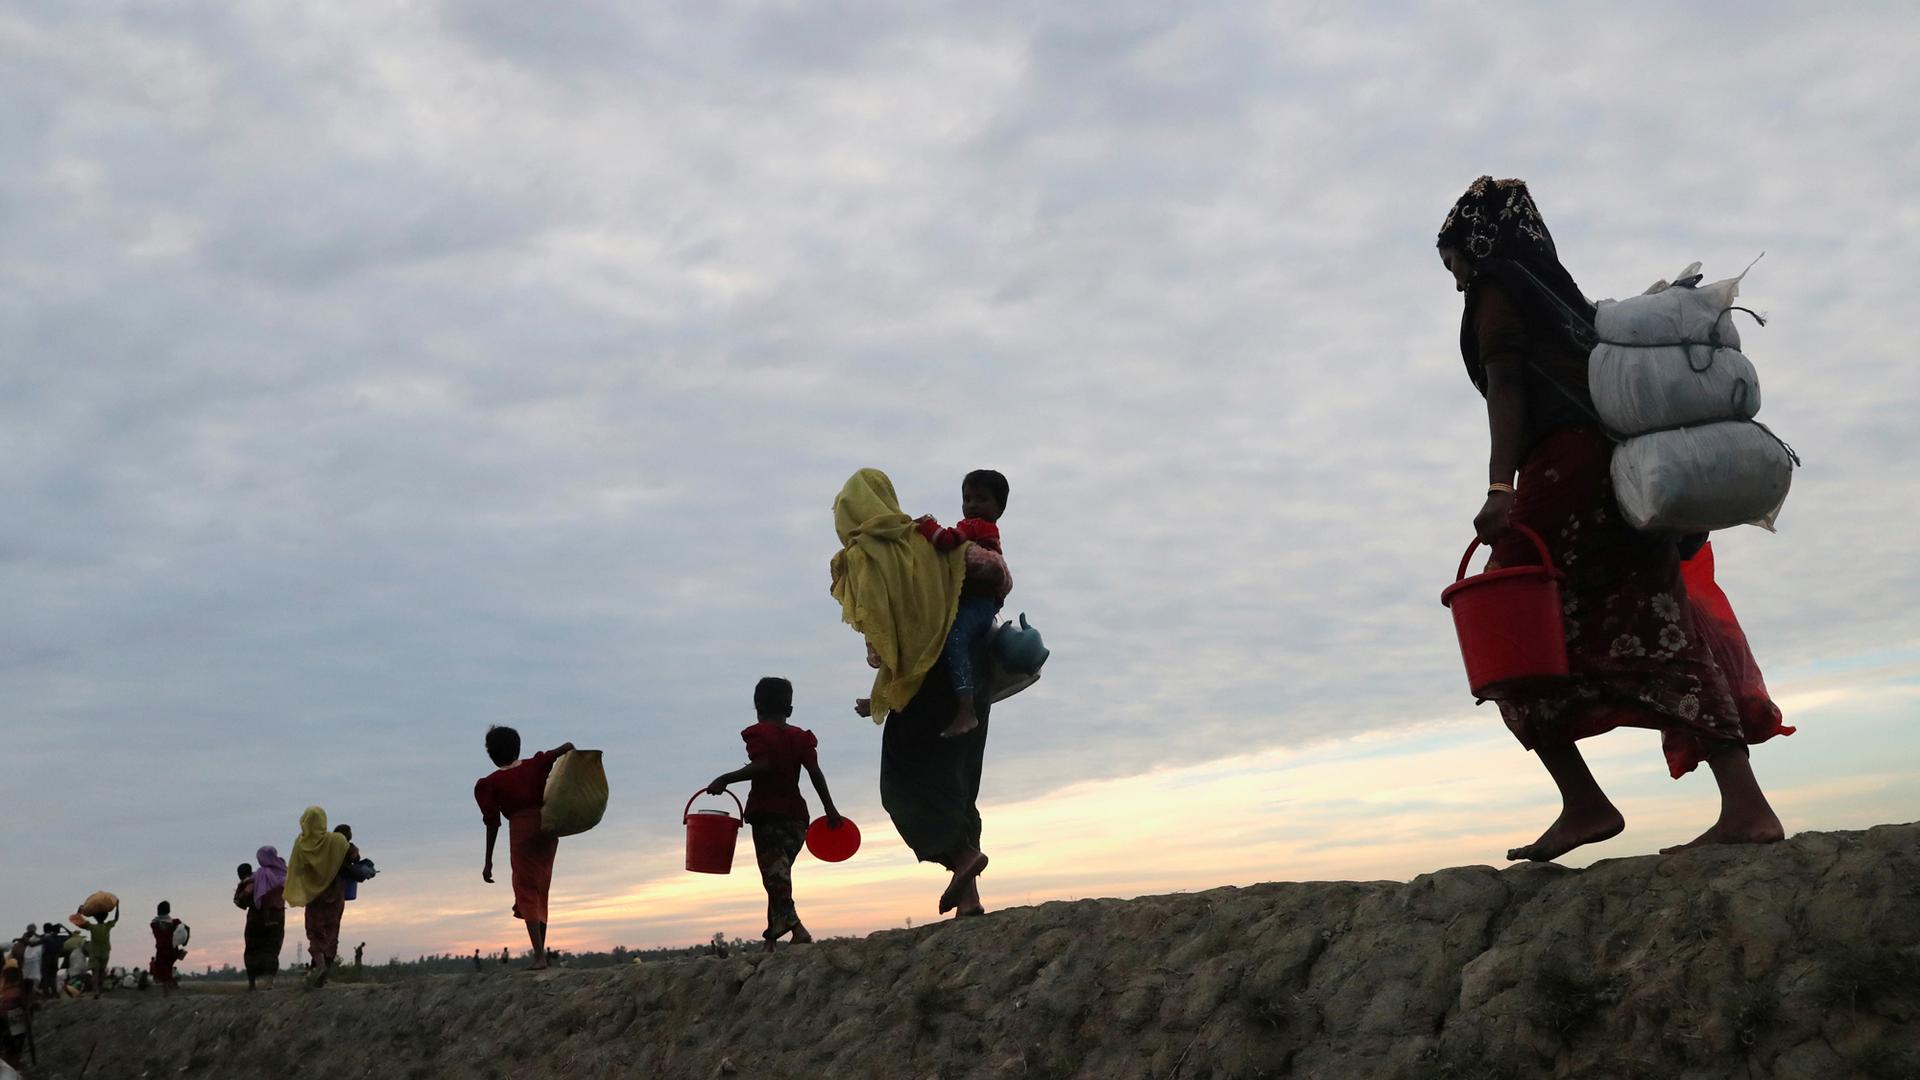 Rohingya refugees walk away from the photographer with their belongings in sacks on their backs.